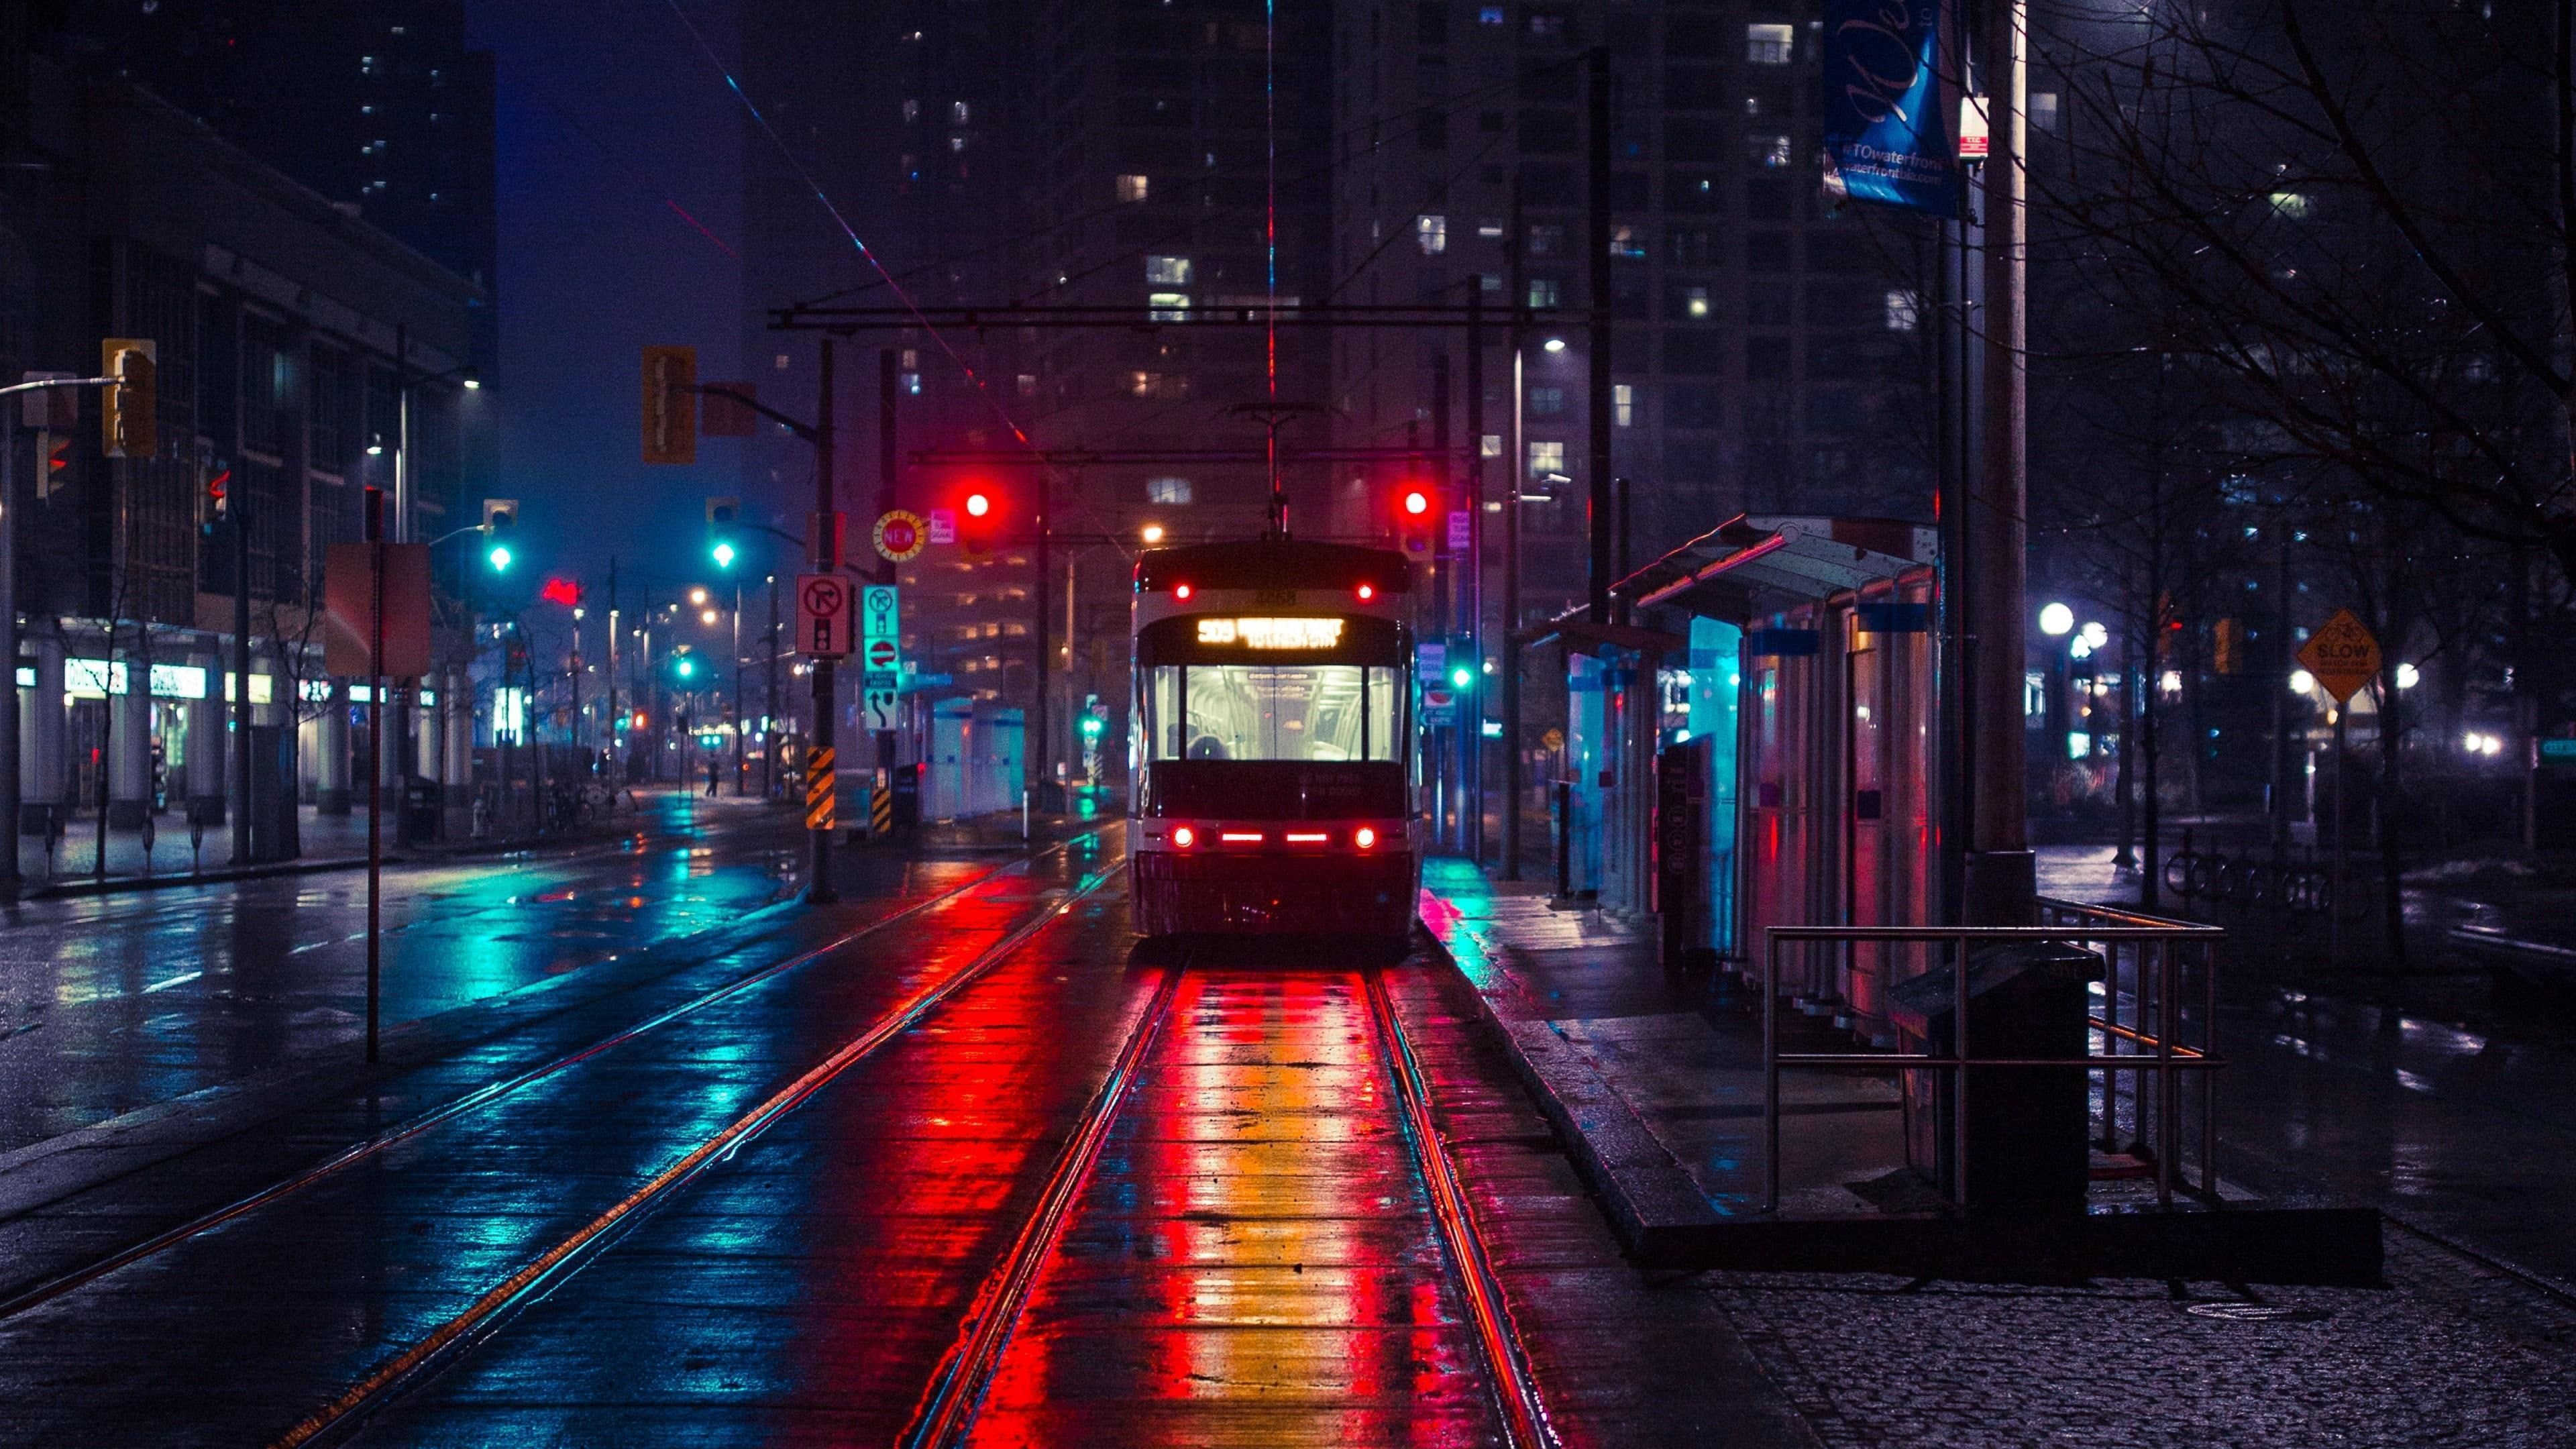 A train is coming down the tracks in the city at night. - Cityscape, night, city